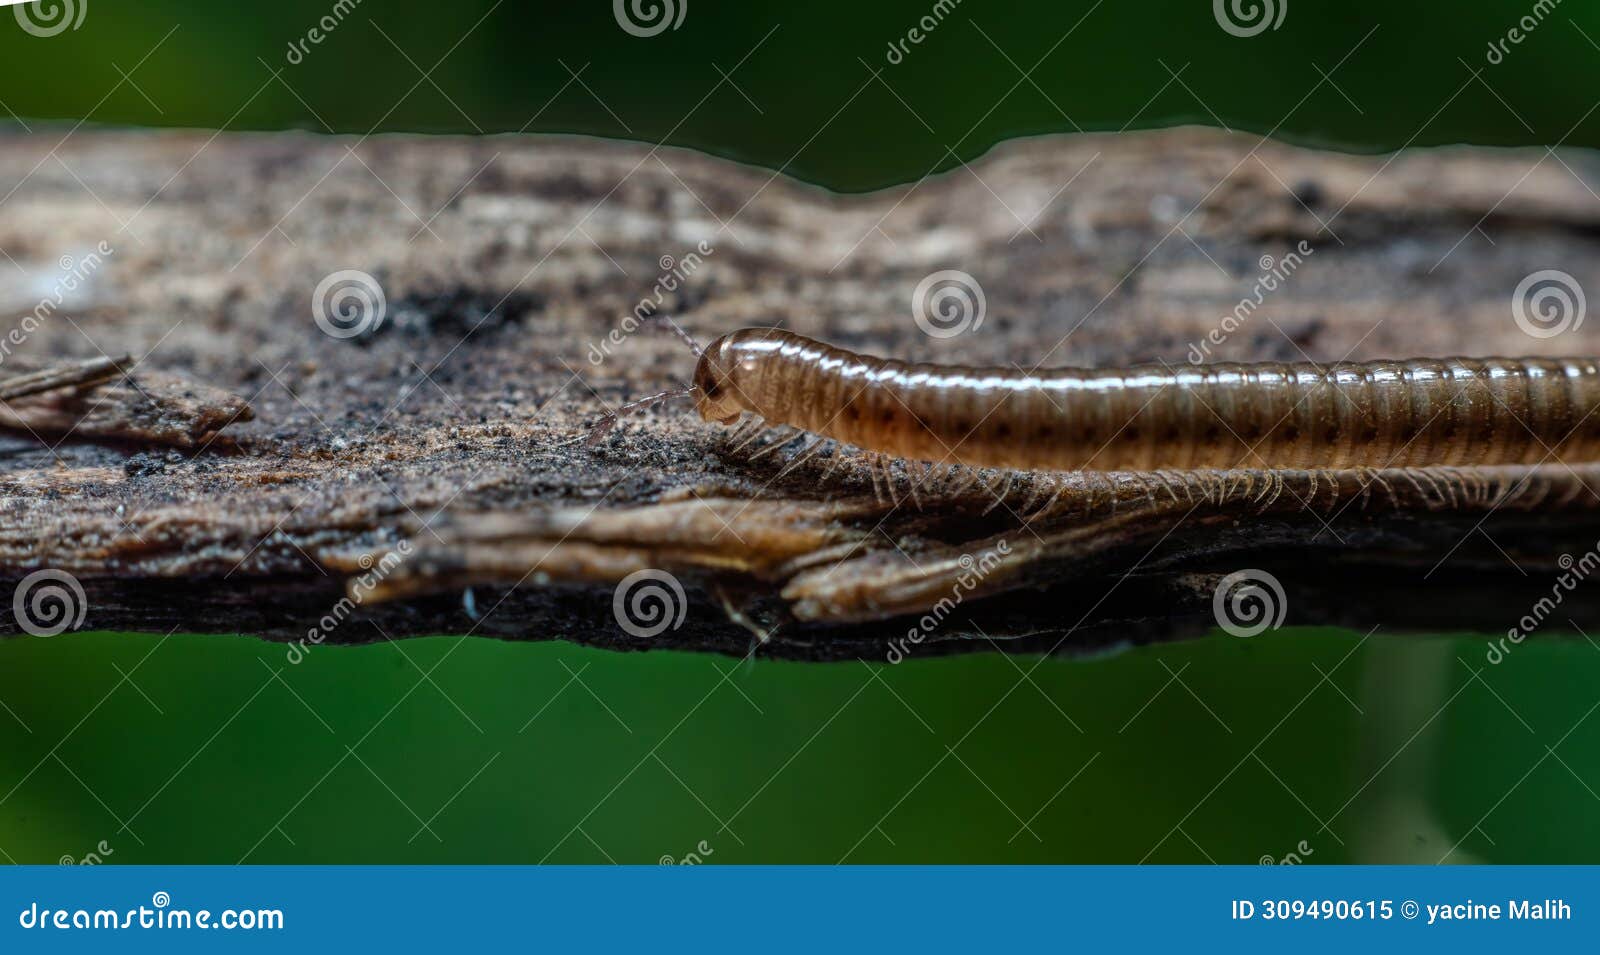 ommatoiulus moreleti, commonly known as the portuguese millipede, is a herbivorous